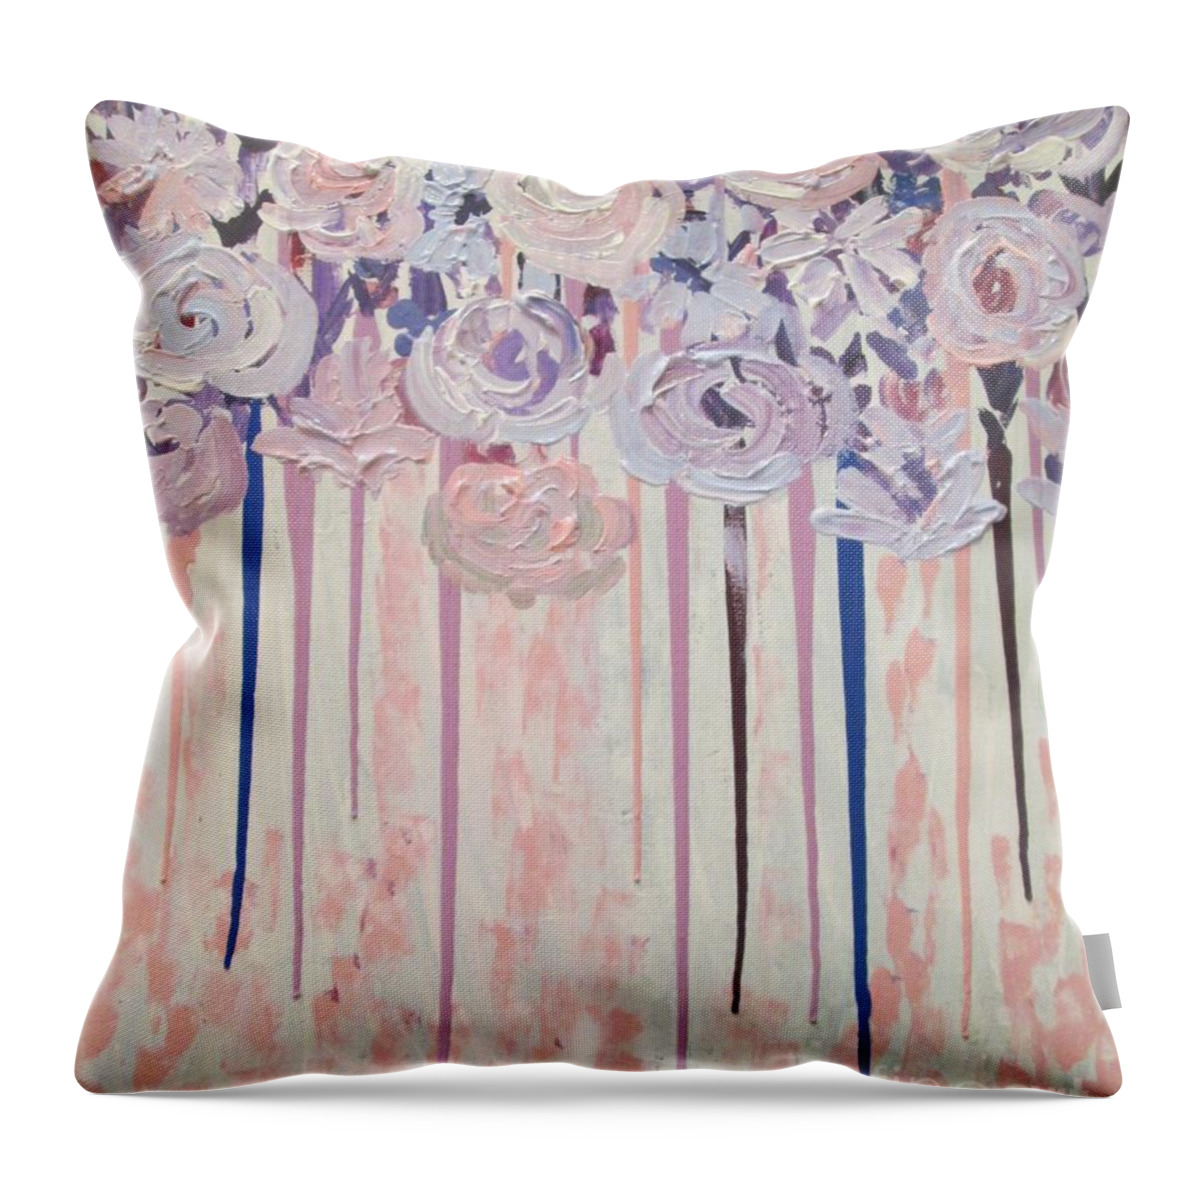 Flowers Throw Pillow featuring the painting A Floral Point by Jennylynd James